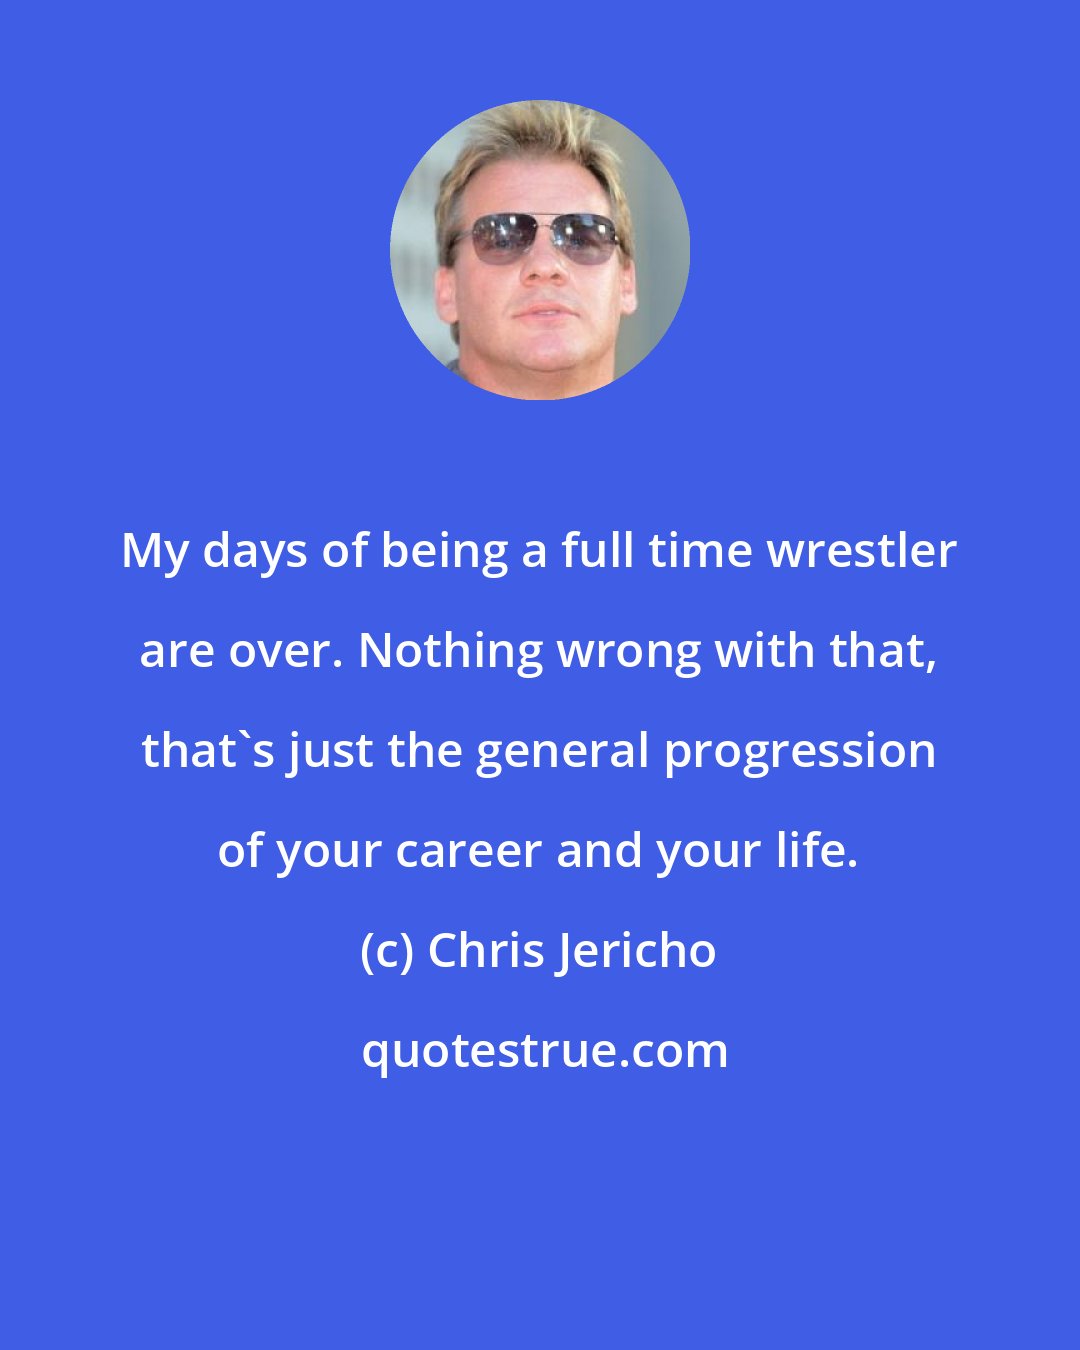 Chris Jericho: My days of being a full time wrestler are over. Nothing wrong with that, that's just the general progression of your career and your life.